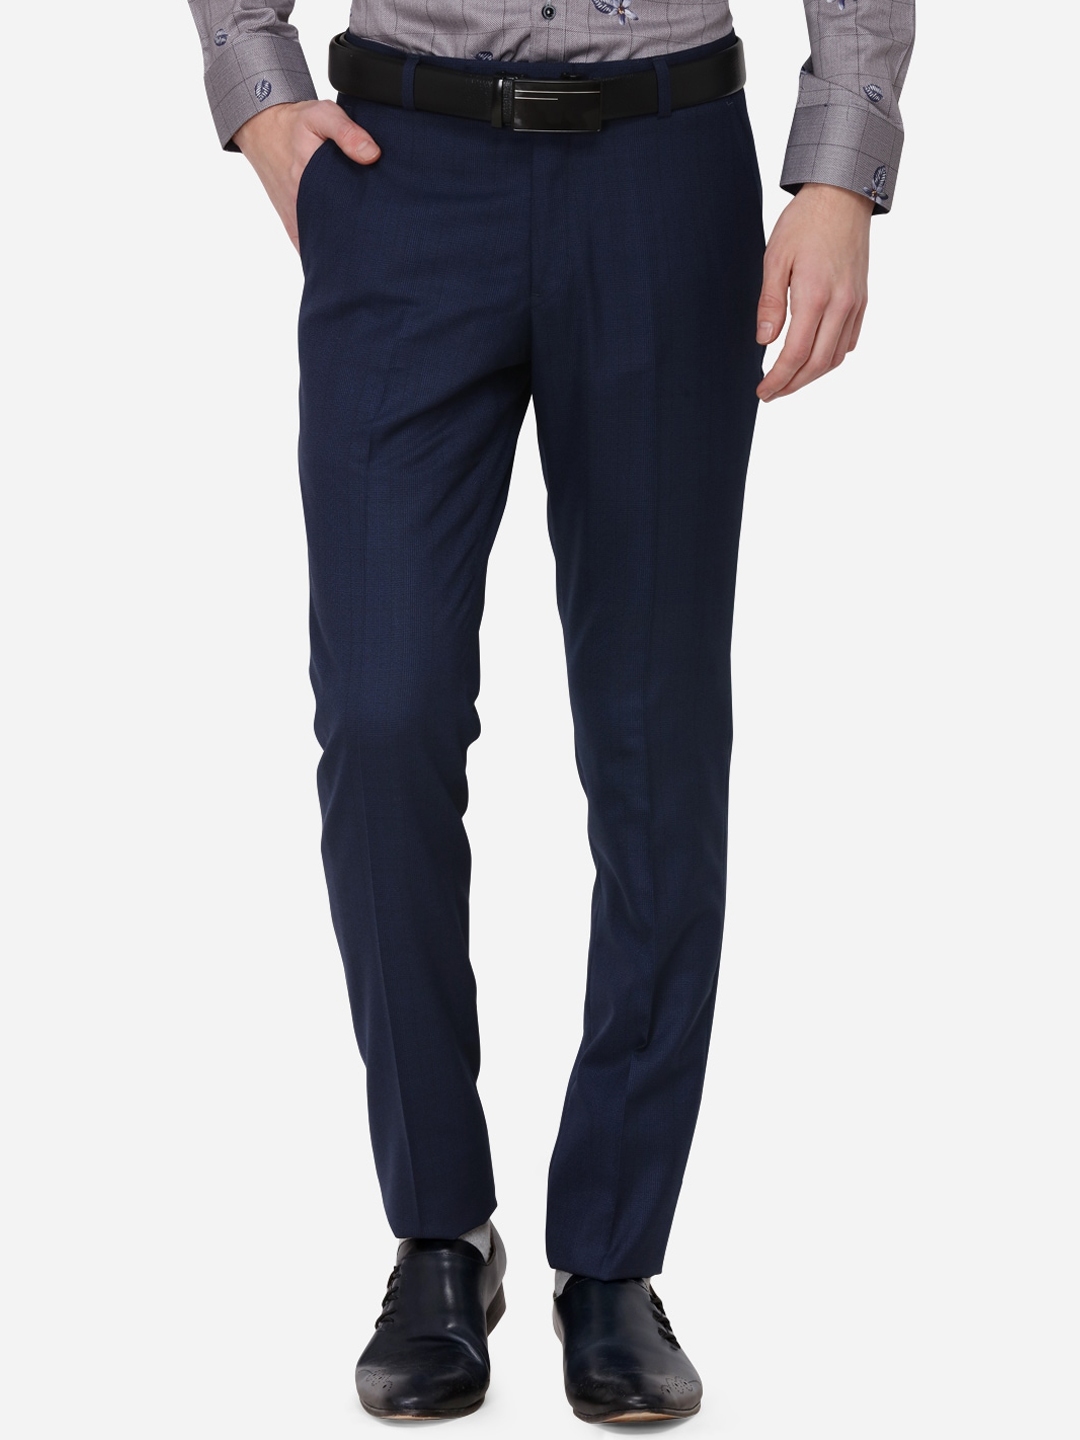 Buy JADE BLUE Men Navy Blue Tapered Fit Checked Formal Trousers ...